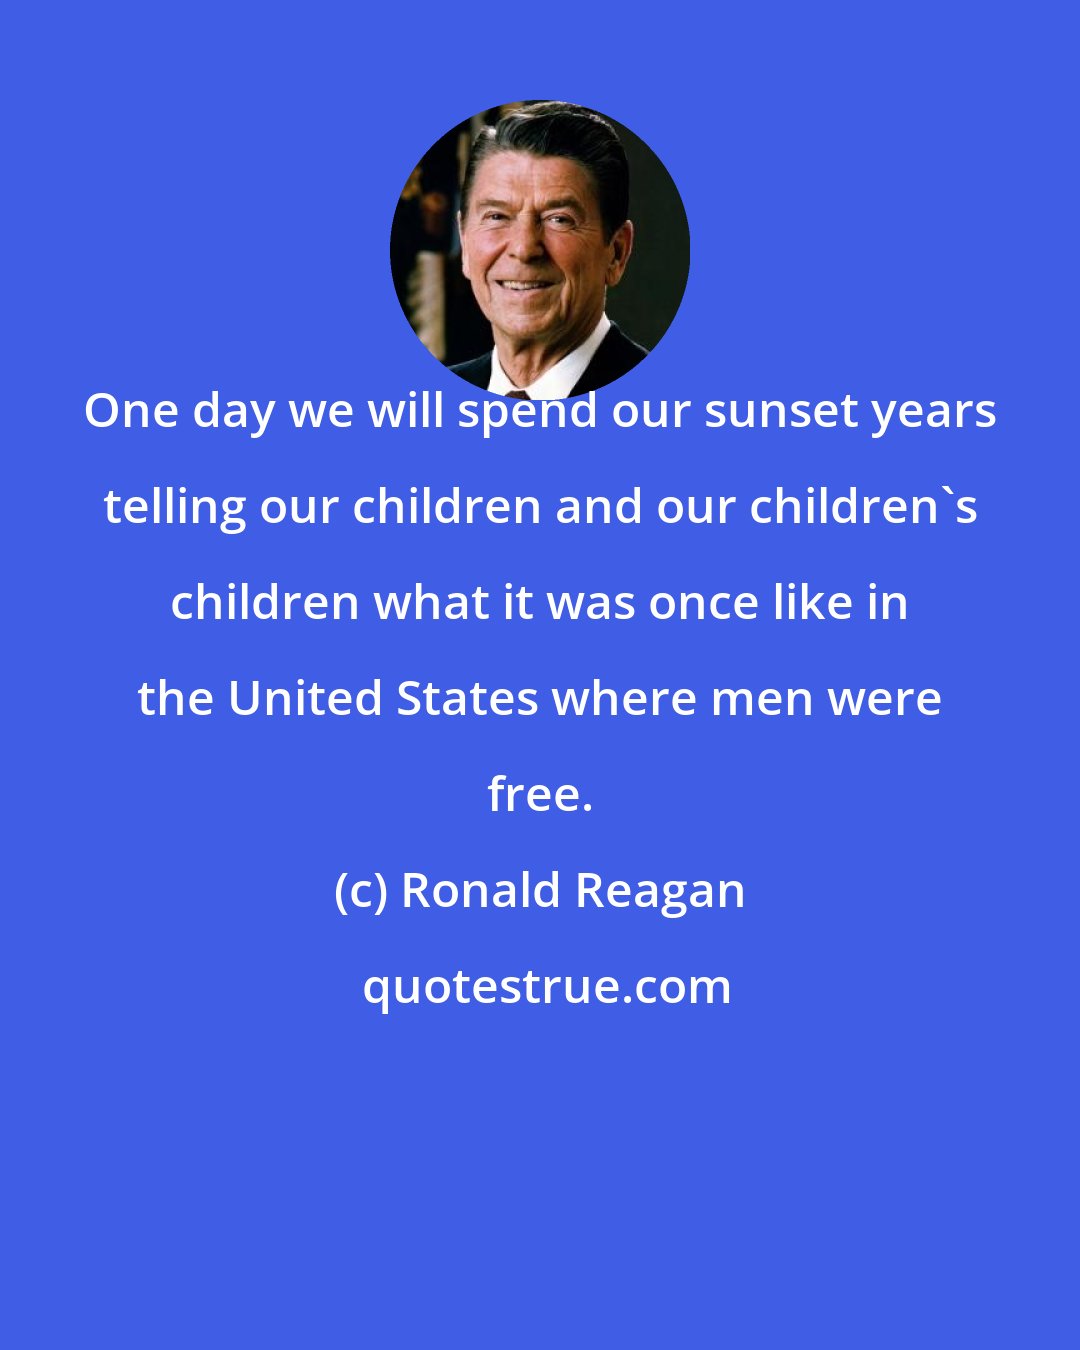 Ronald Reagan: One day we will spend our sunset years telling our children and our children's children what it was once like in the United States where men were free.